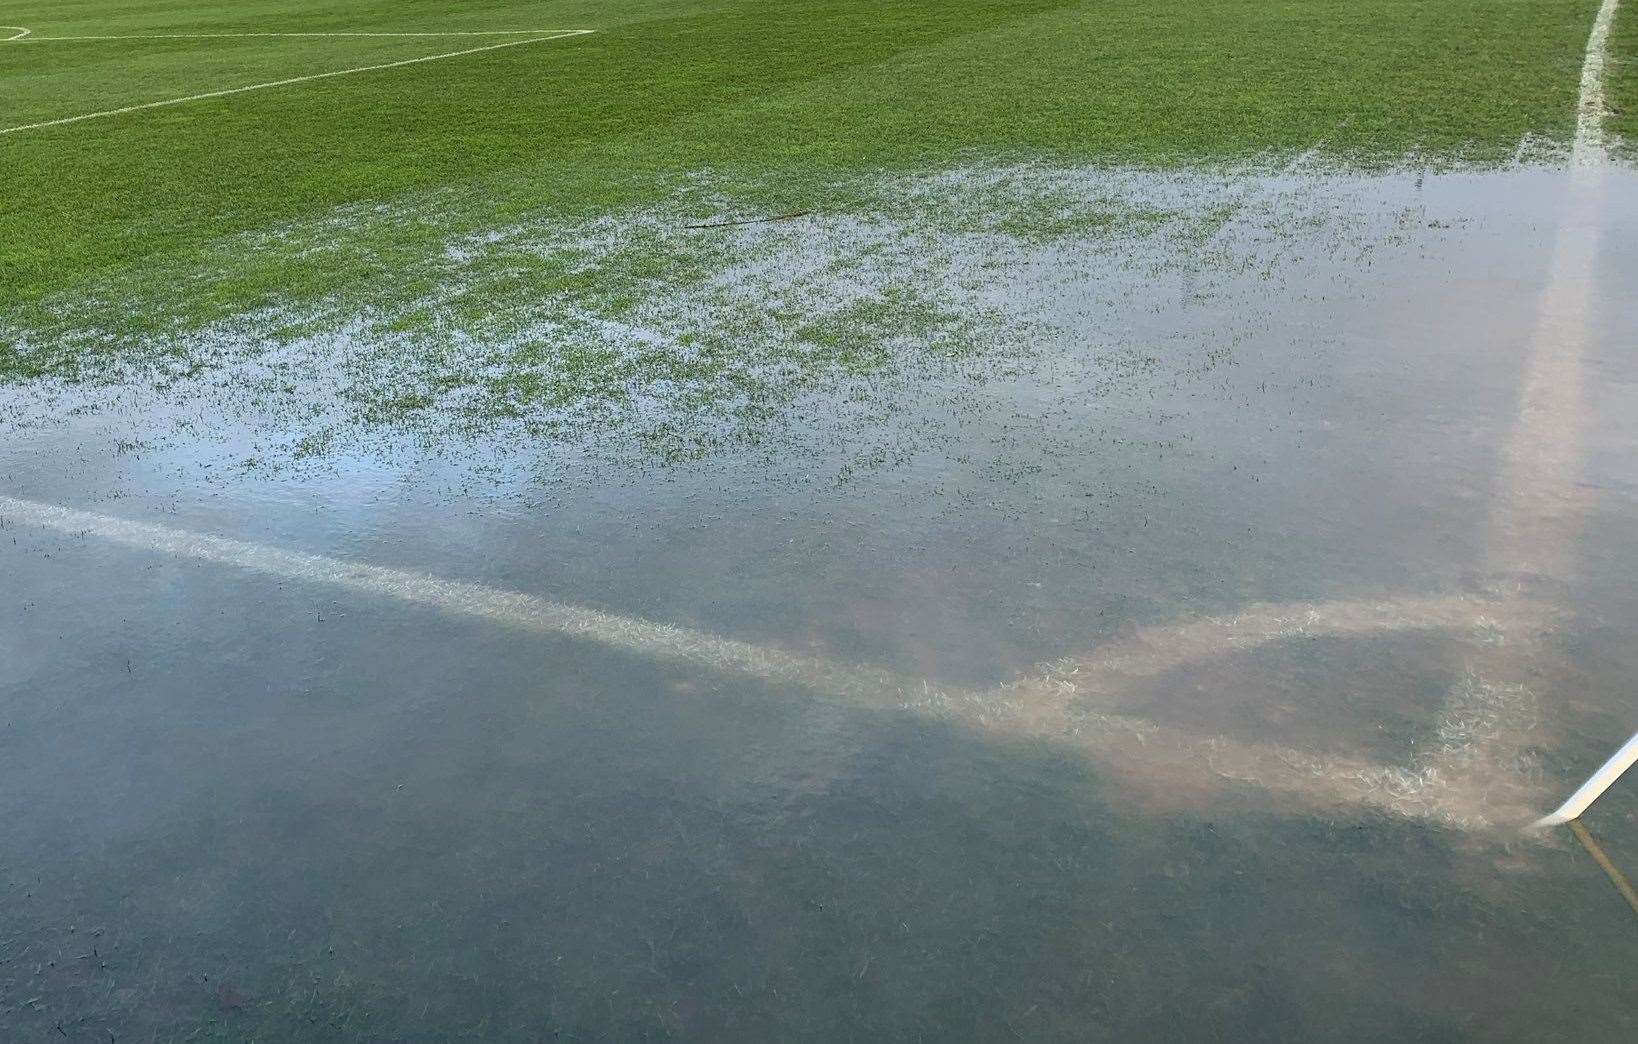 The FA says tens of thousands of matches each year are lost to waterlogged pitches